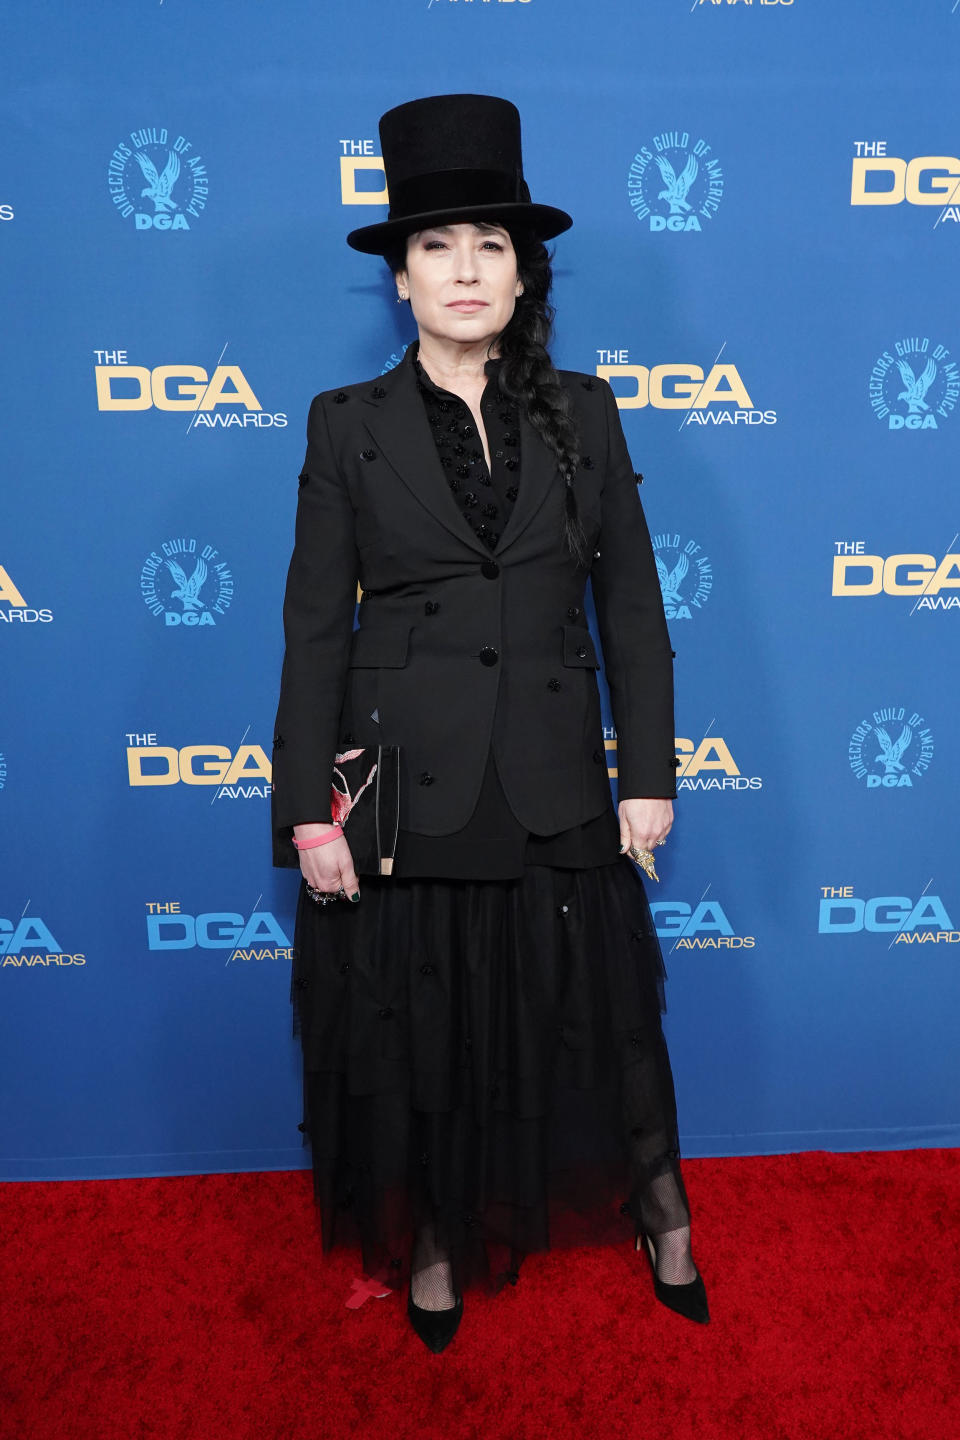 Amy Sherman-Palladino arrives for the 72nd Annual Directors Guild Of America Awards at The Ritz Carlton on January 25, 2020 in Los Angeles, California.  (Rachel Luna / WireImage)